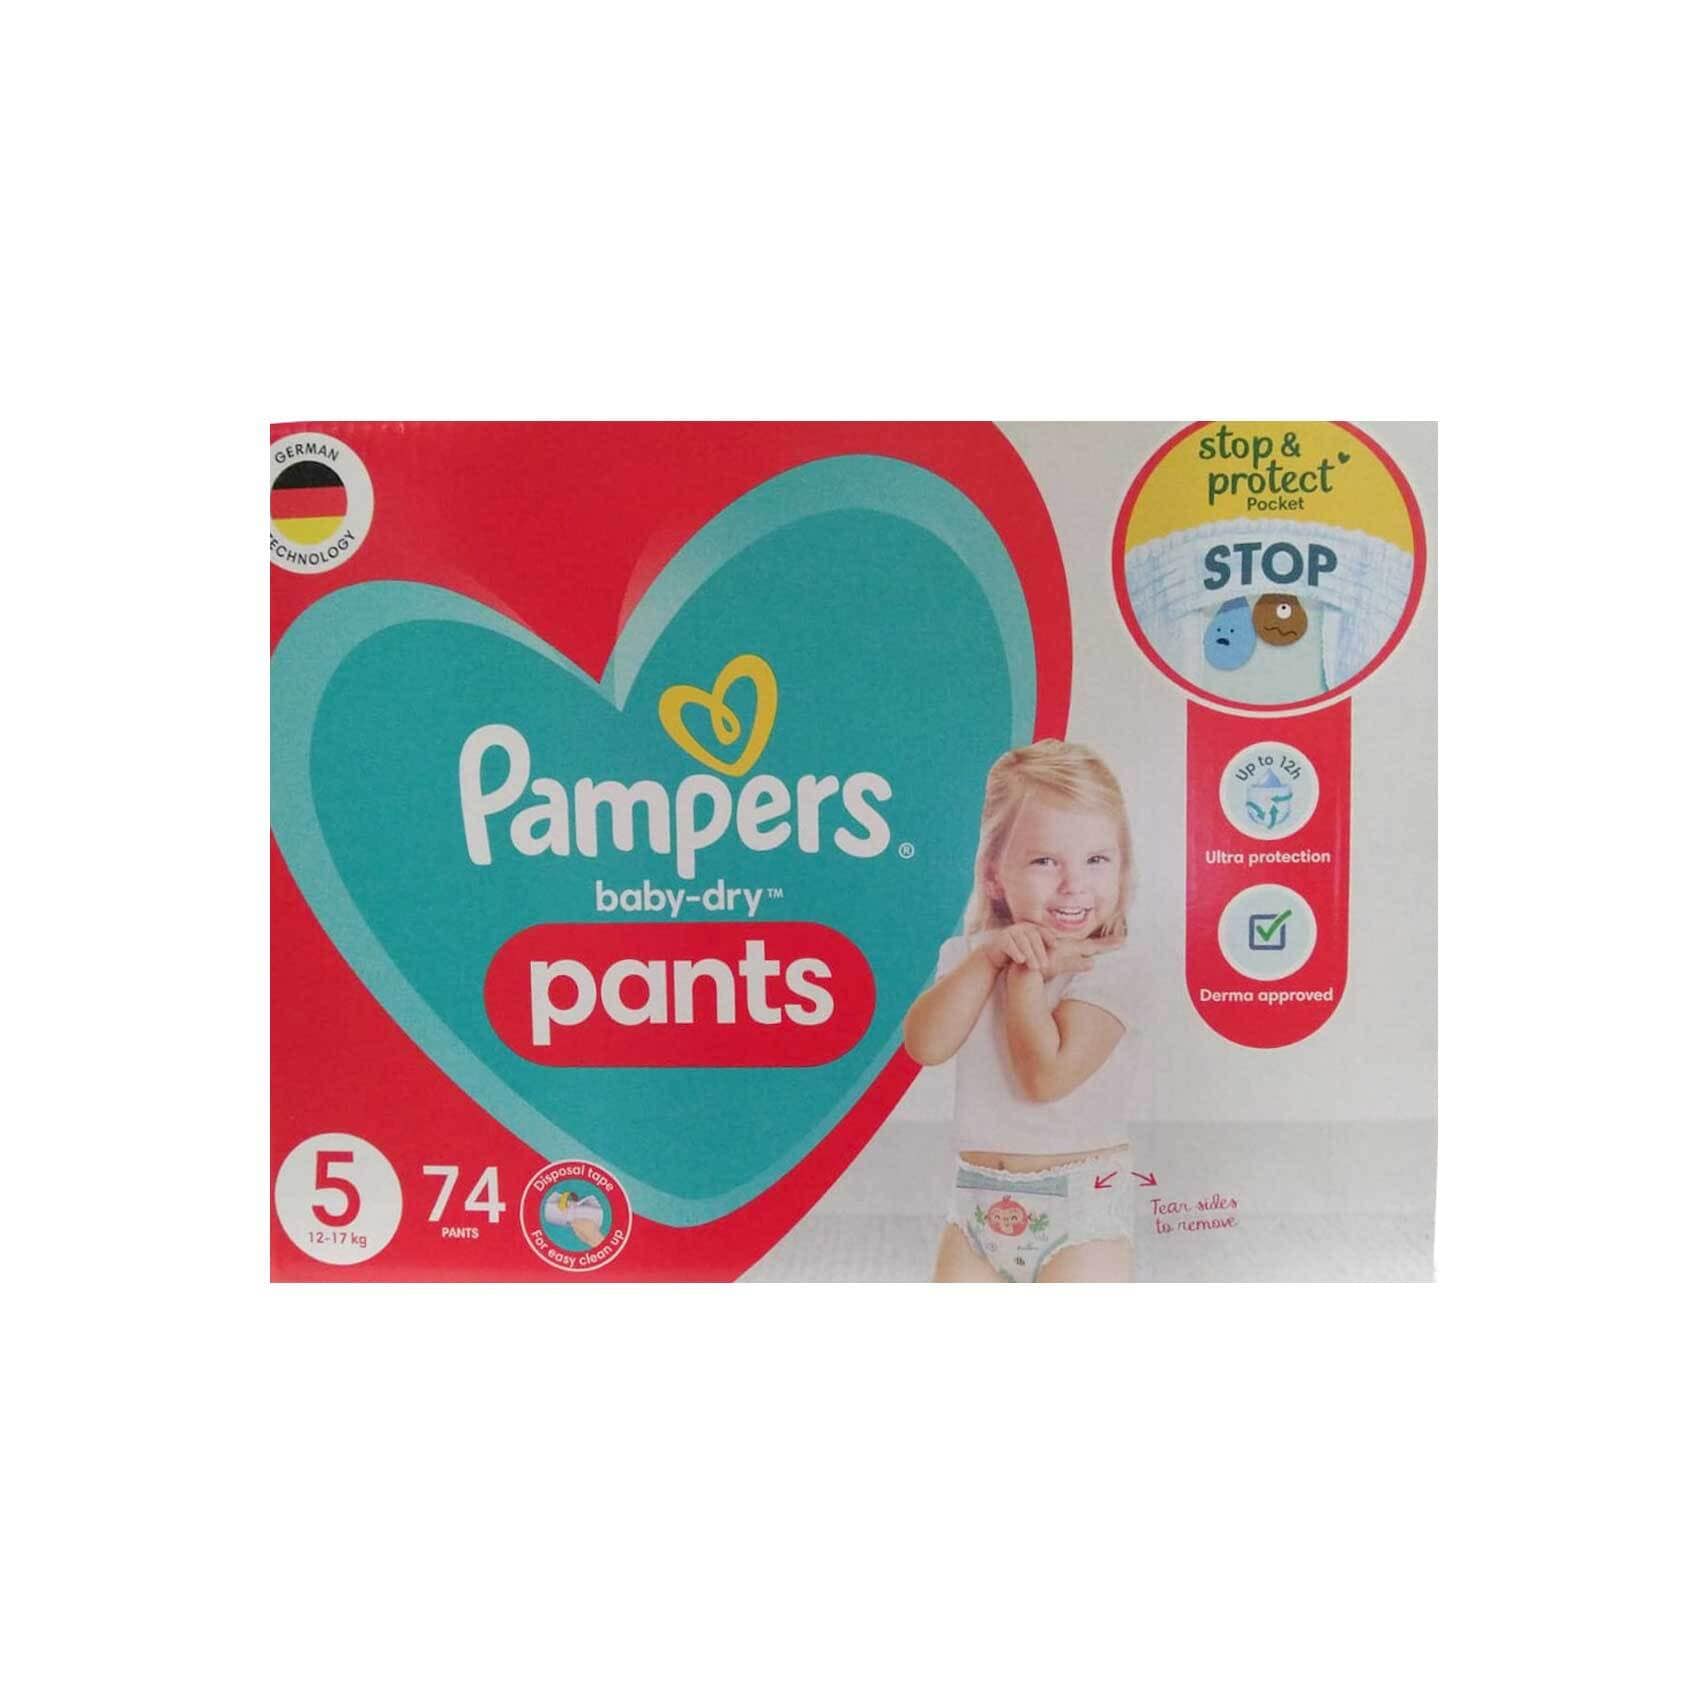 Pampers Baby- Dry Pants 5 74' pieces